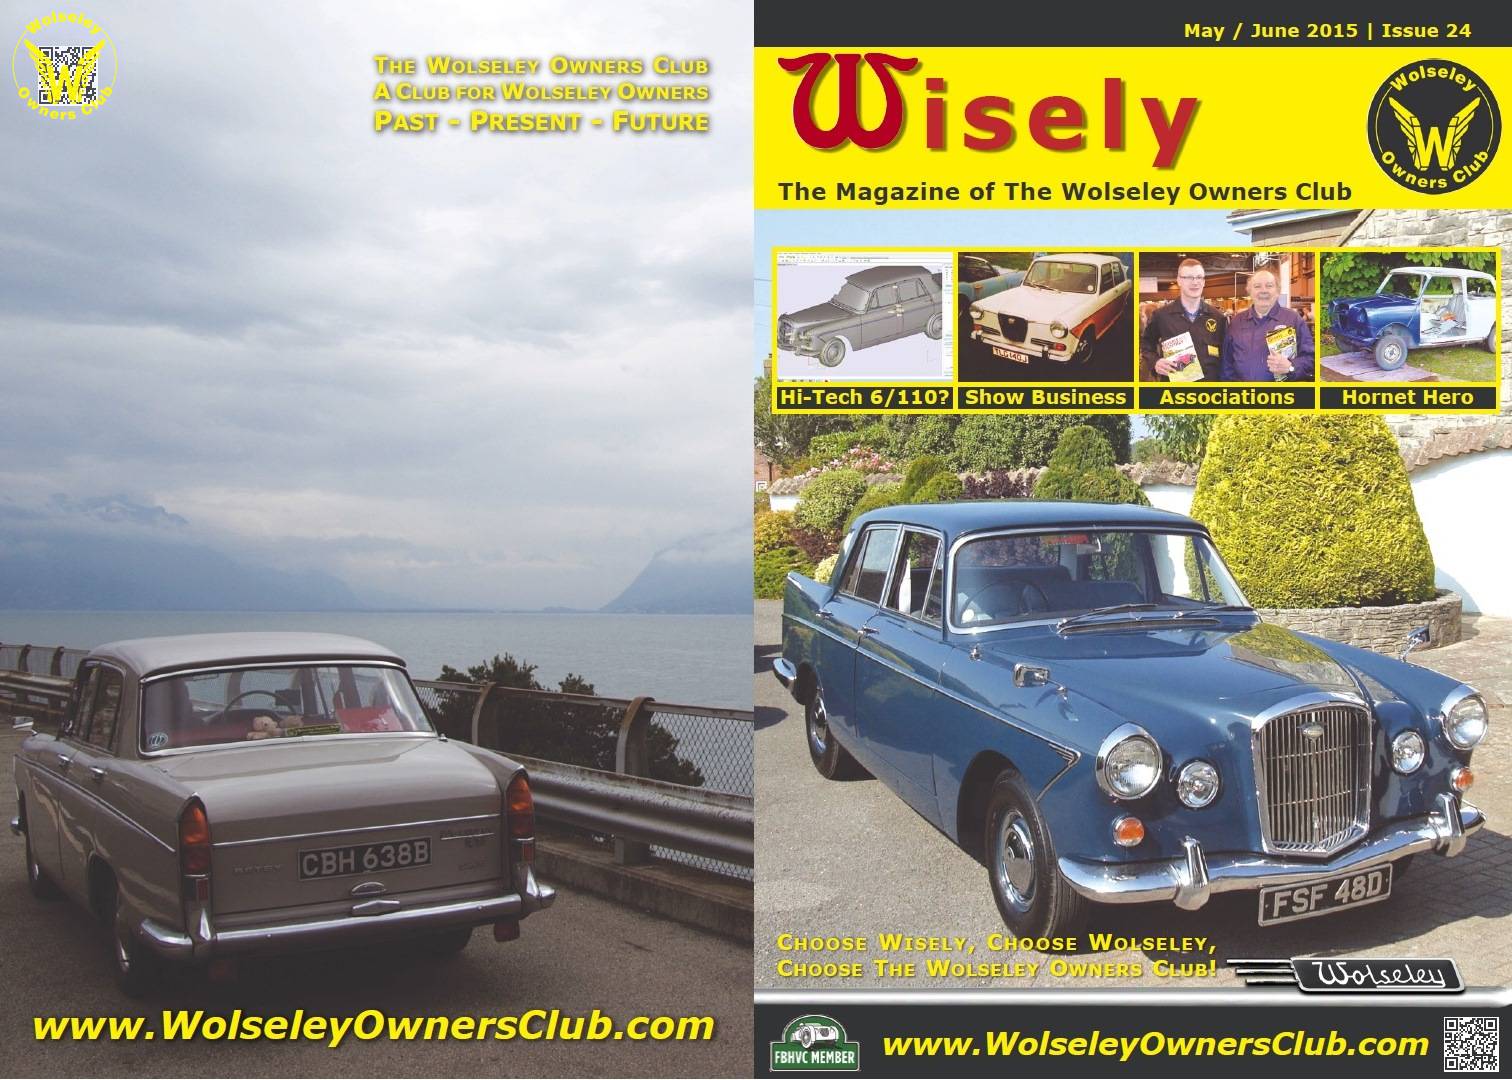 Wisely Issue 24